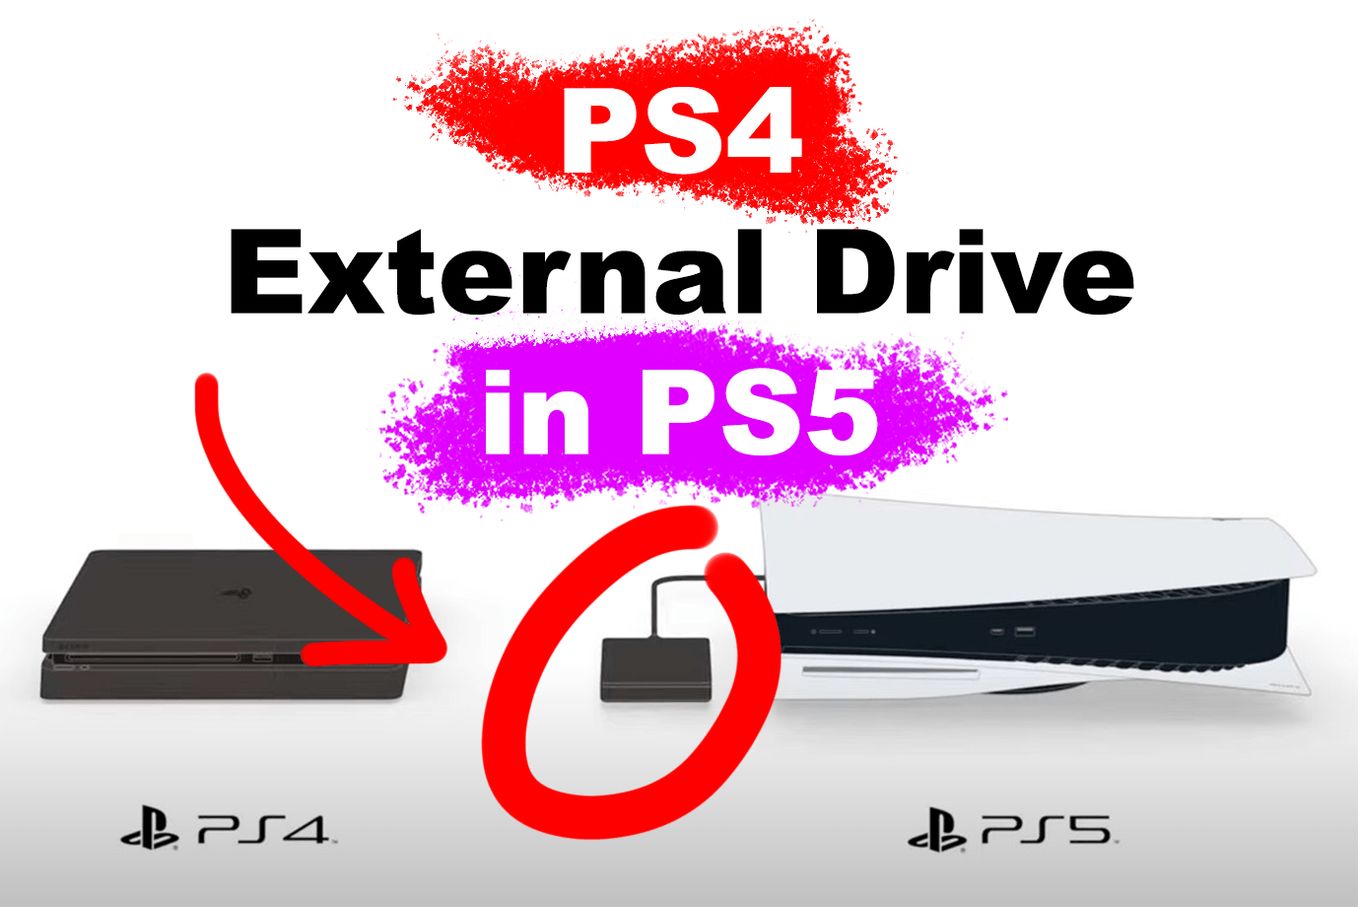 My PS4 External Hard Work PS5? [Full Explanation]